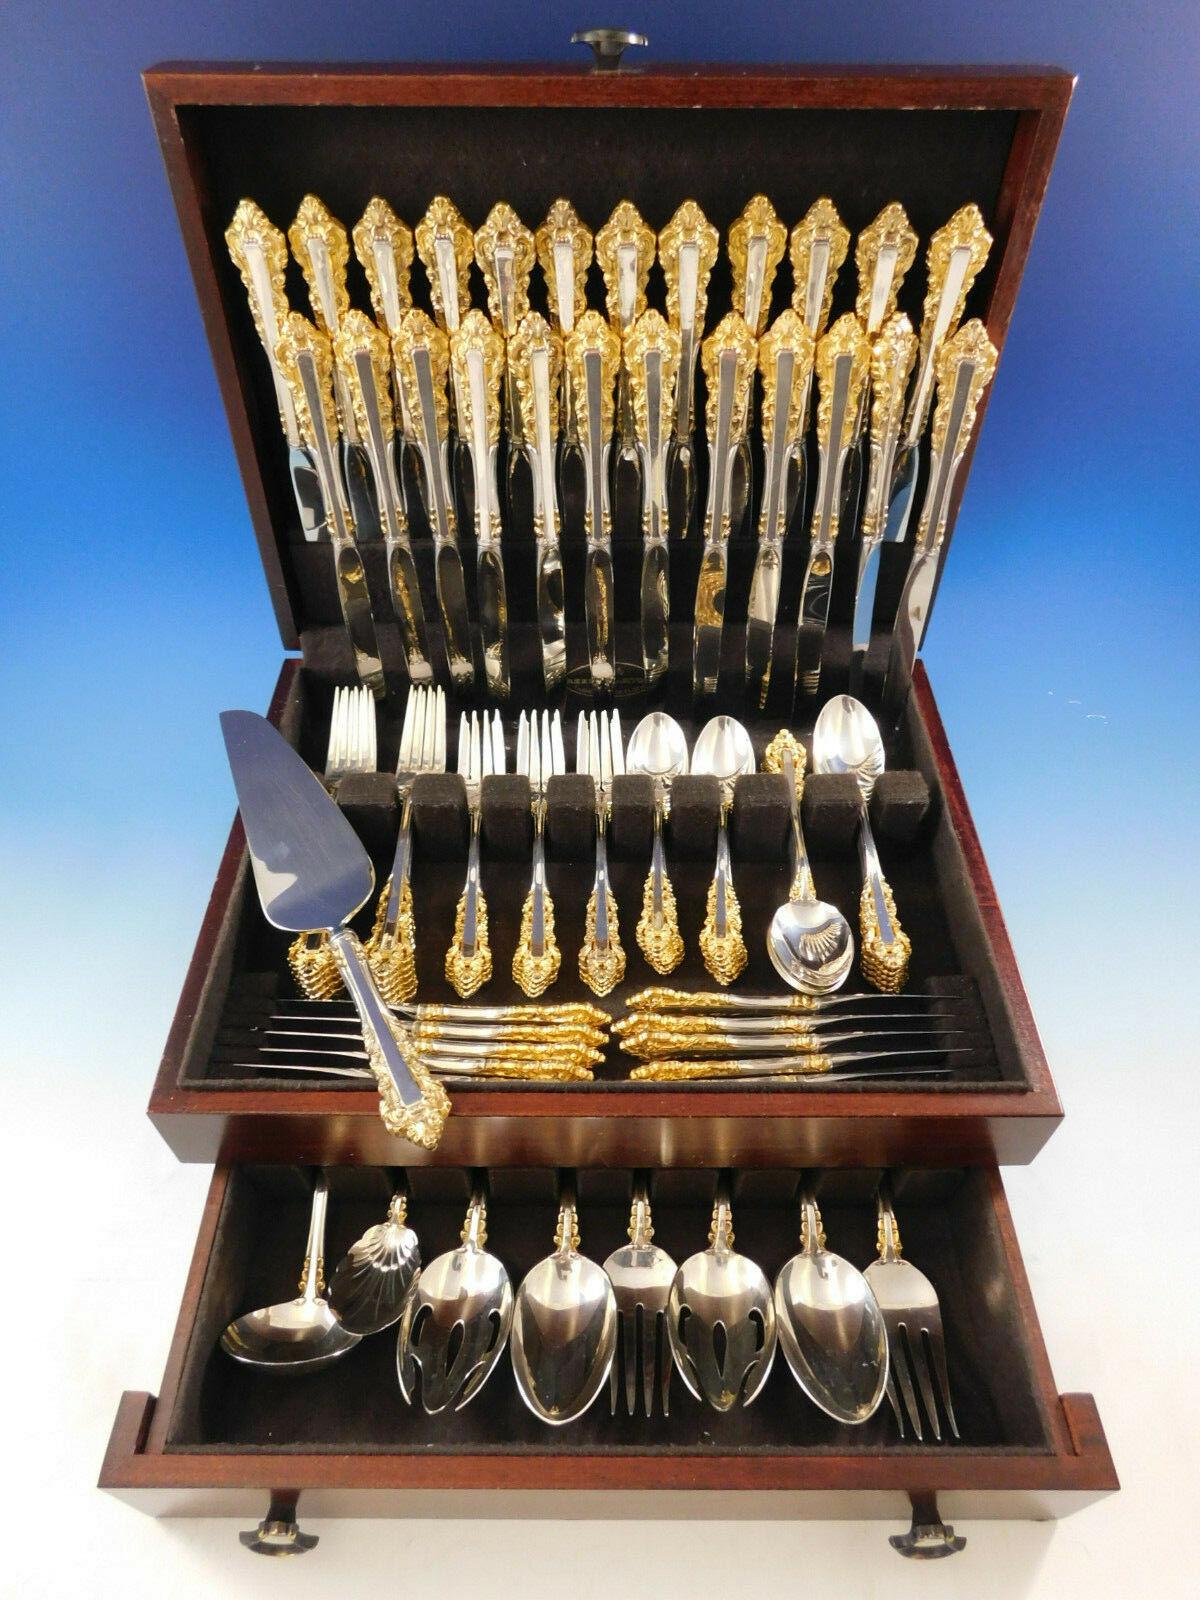 Golden Medici by Gorham sterling silver flatware set with gold accent, 93 pieces. This set includes:

12 knives, 9 1/8